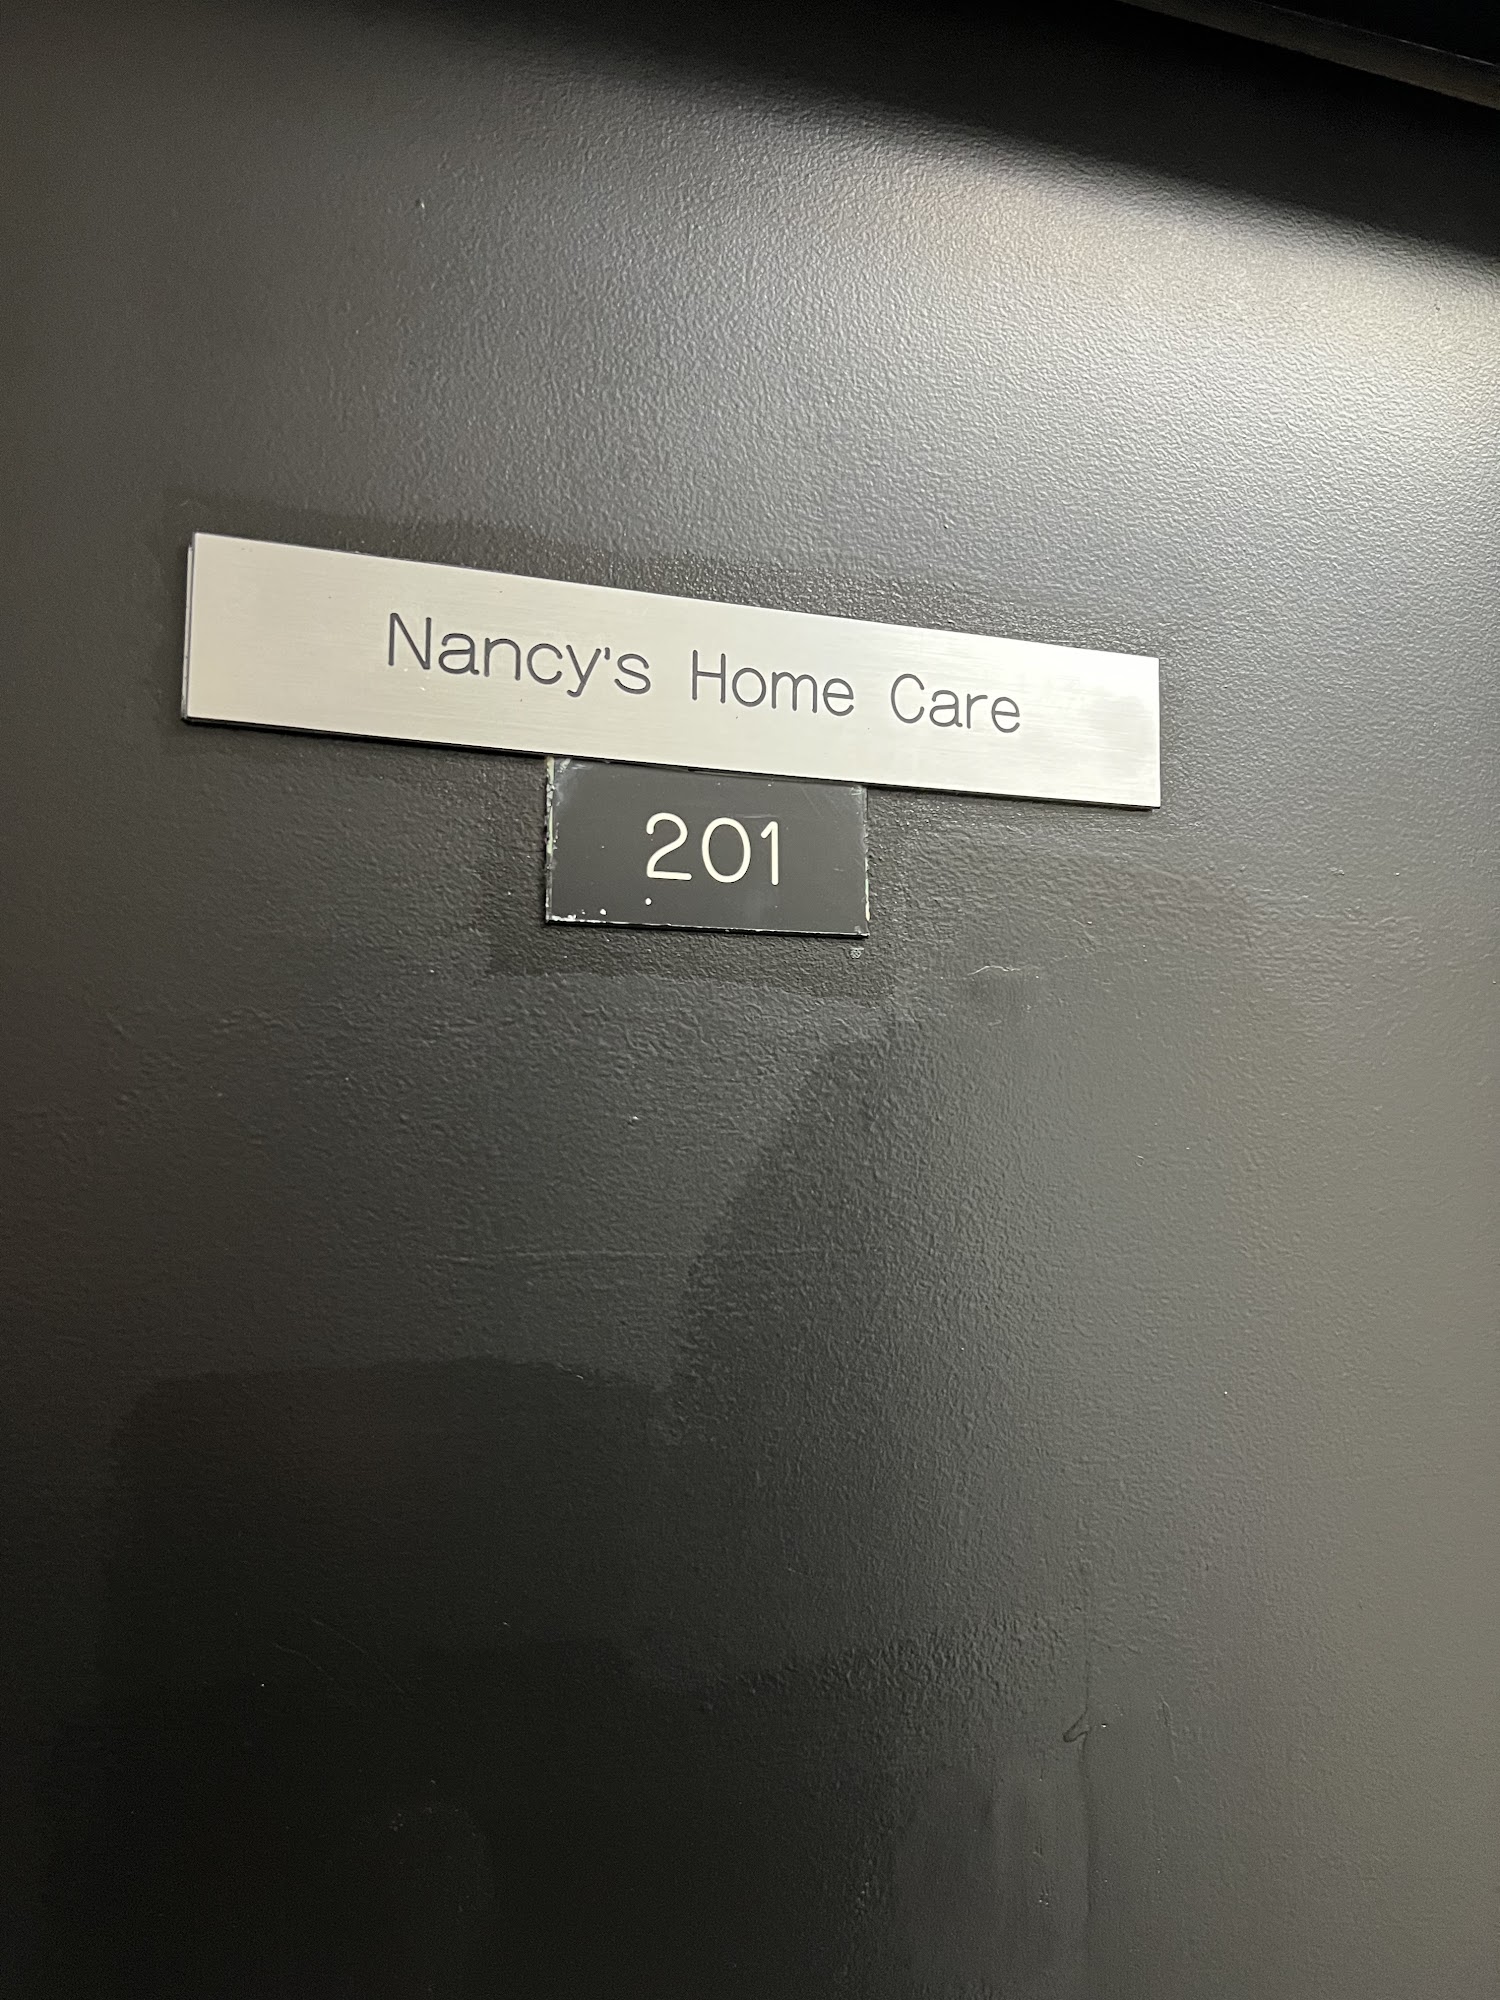 Nancy's Home Care Hickory Hills 7667 W 95th St, Hickory Hills Illinois 60457